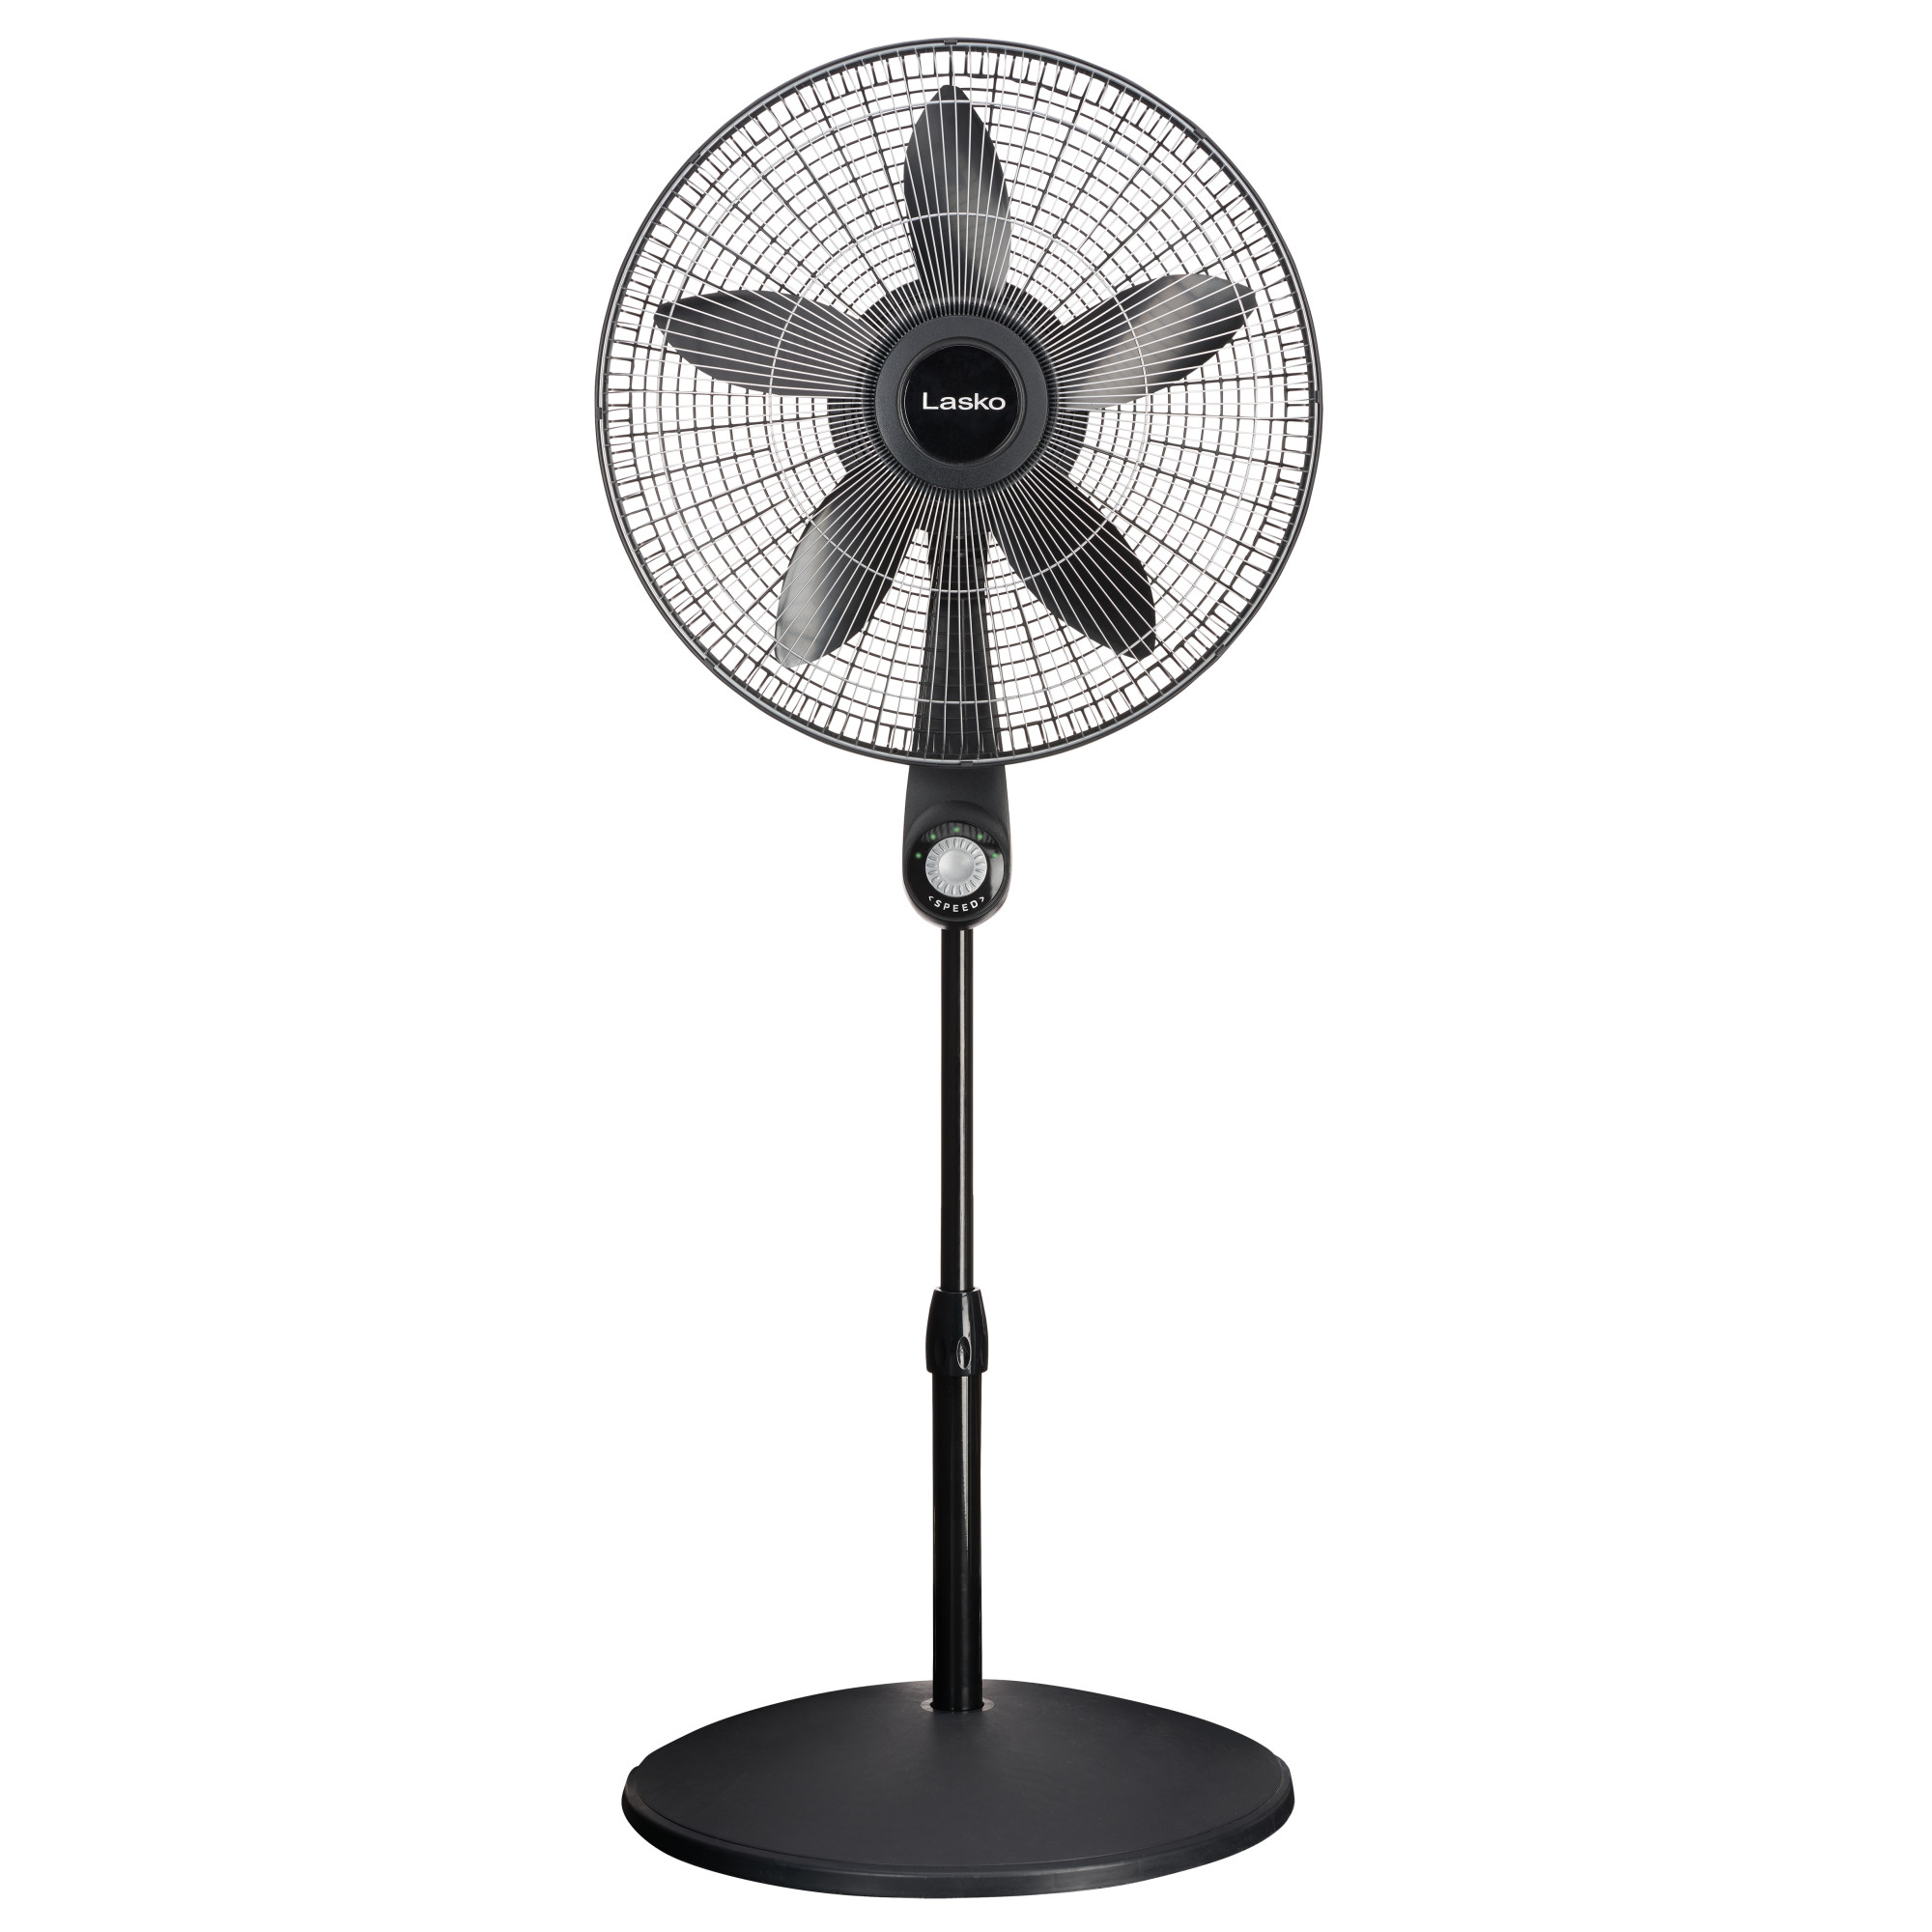 Lasko 18" 5-Speed High Performance Pedestal Fan with Remote, 54" H, Black, S18602, New - image 2 of 7